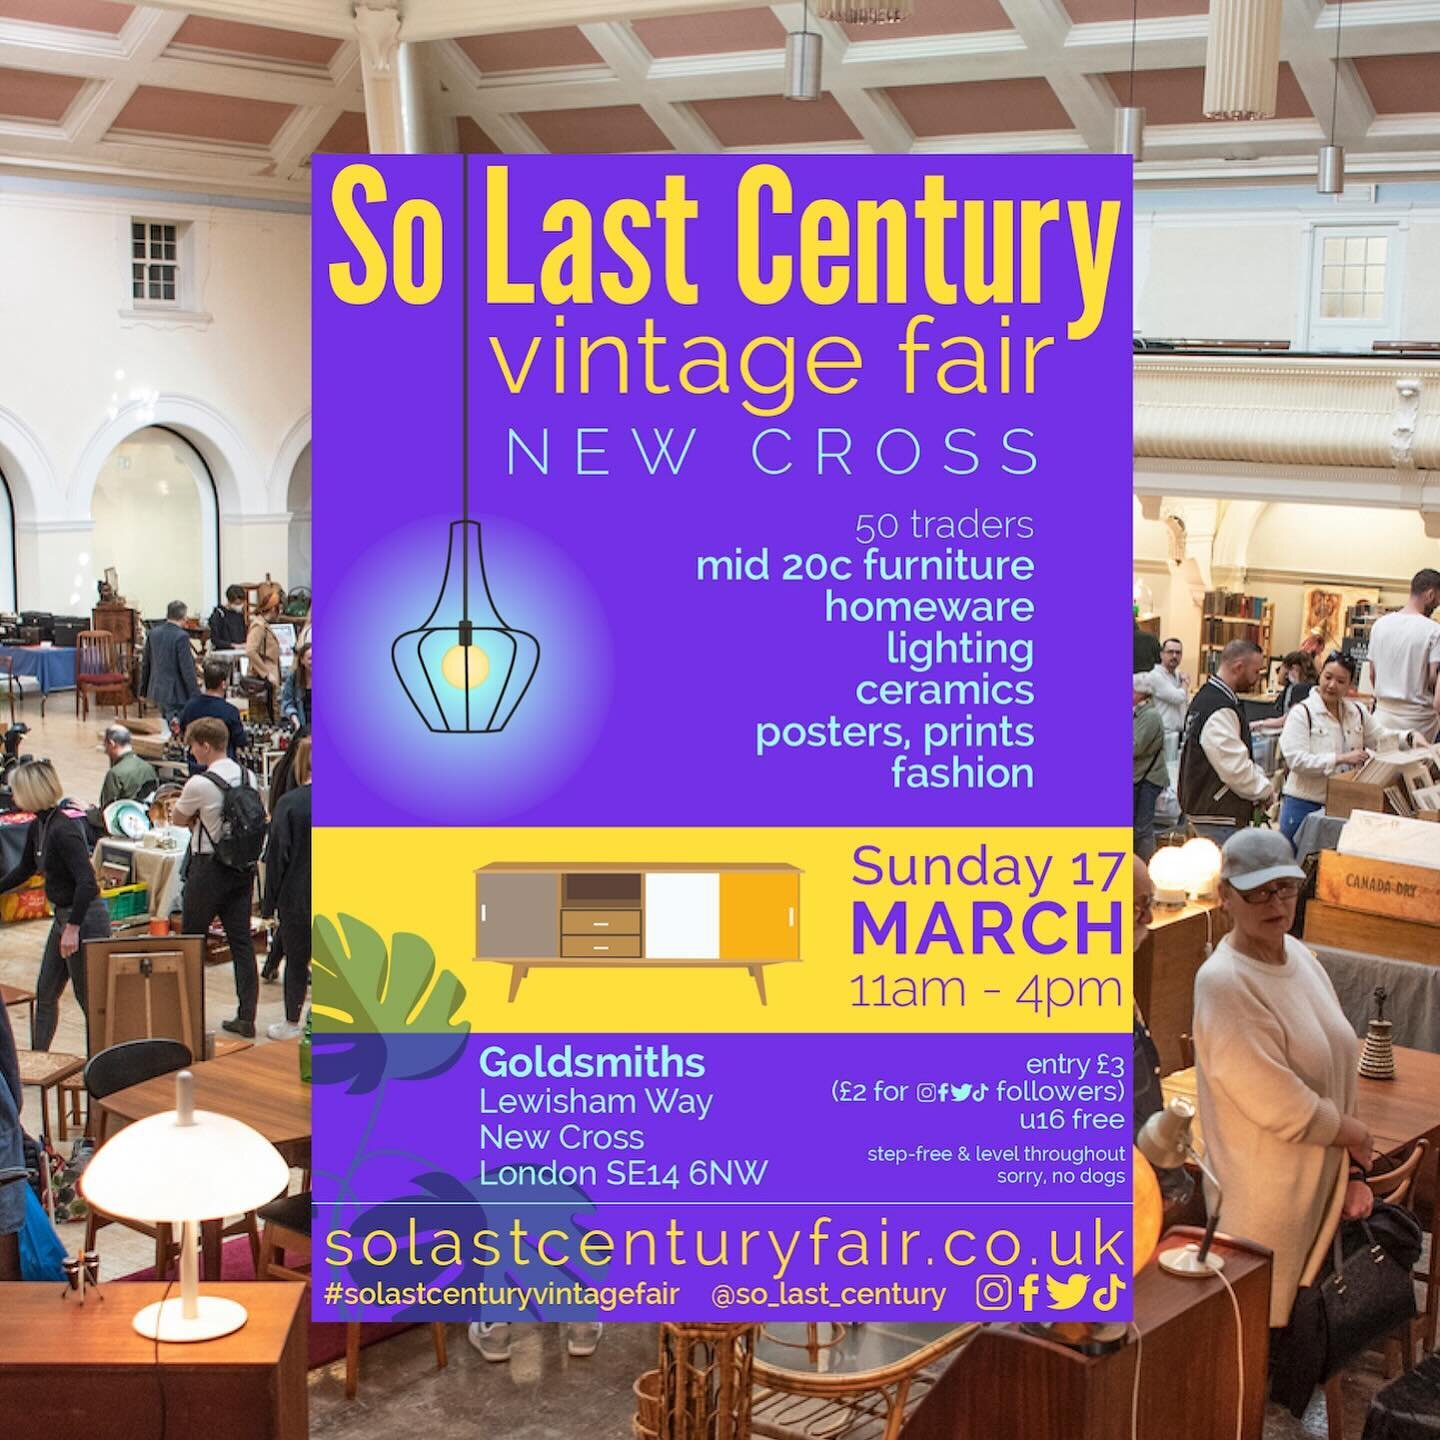 So last Century&rsquo;s Vintage Fair is at Goldsmiths, University of London, this Sunday 17 March✨

40 amazing traders in the University&rsquo;s biggest space, the fantastic Great Hall!

Gorgeous Mid 20th century furniture, lighting, stunning ceramic